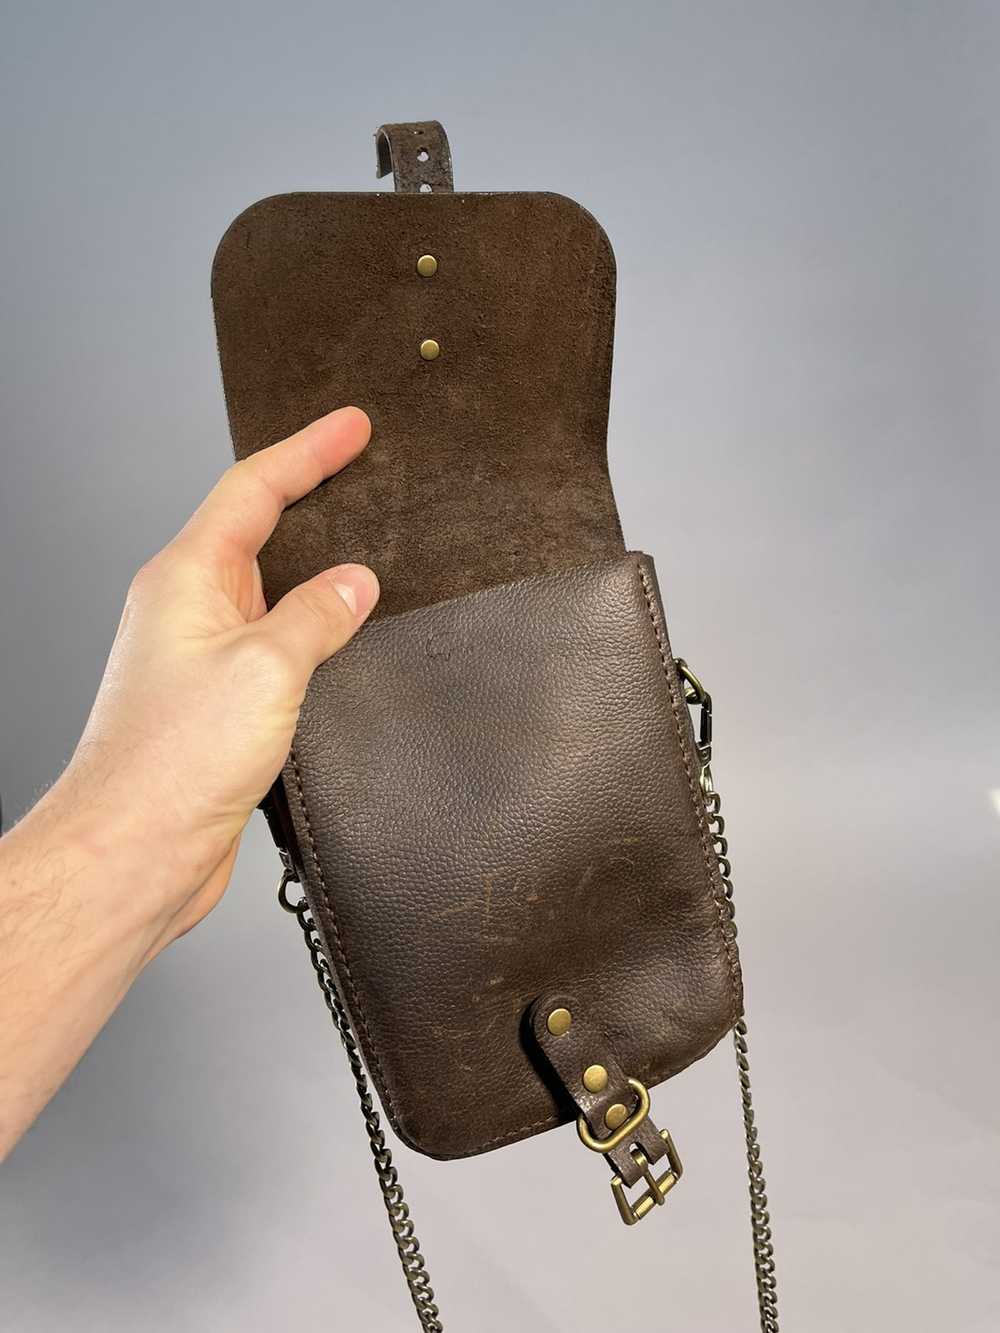 Leather × Vintage Vintage Leather Bag with Chain - image 11